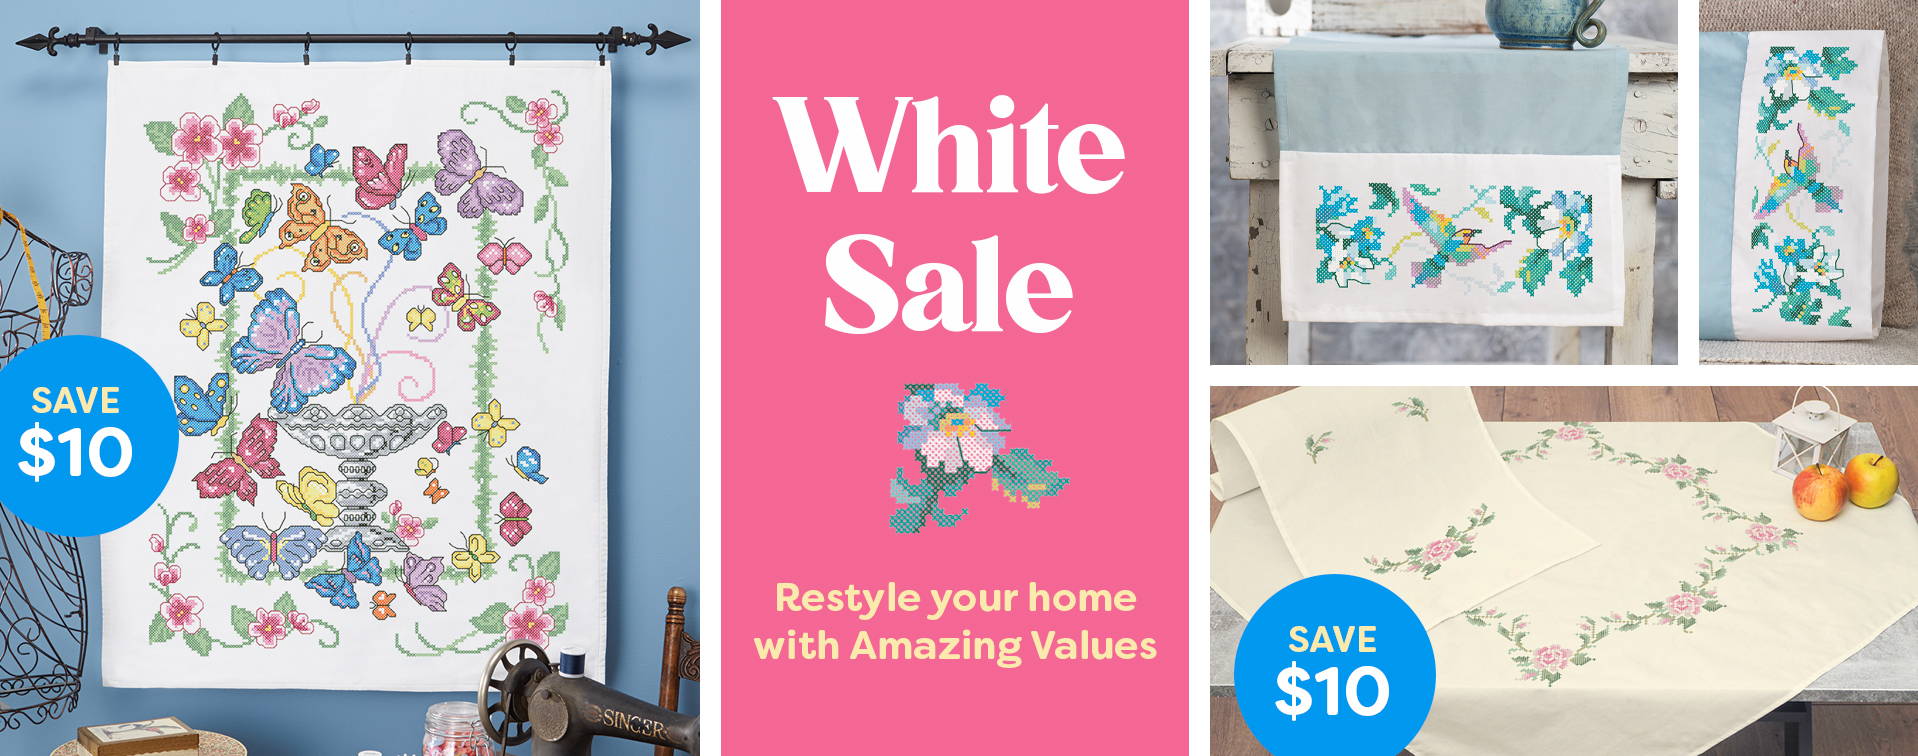 White Sale: Restyle Your Home with Amazing Values. Images: Featured Needlework that can Save $10.